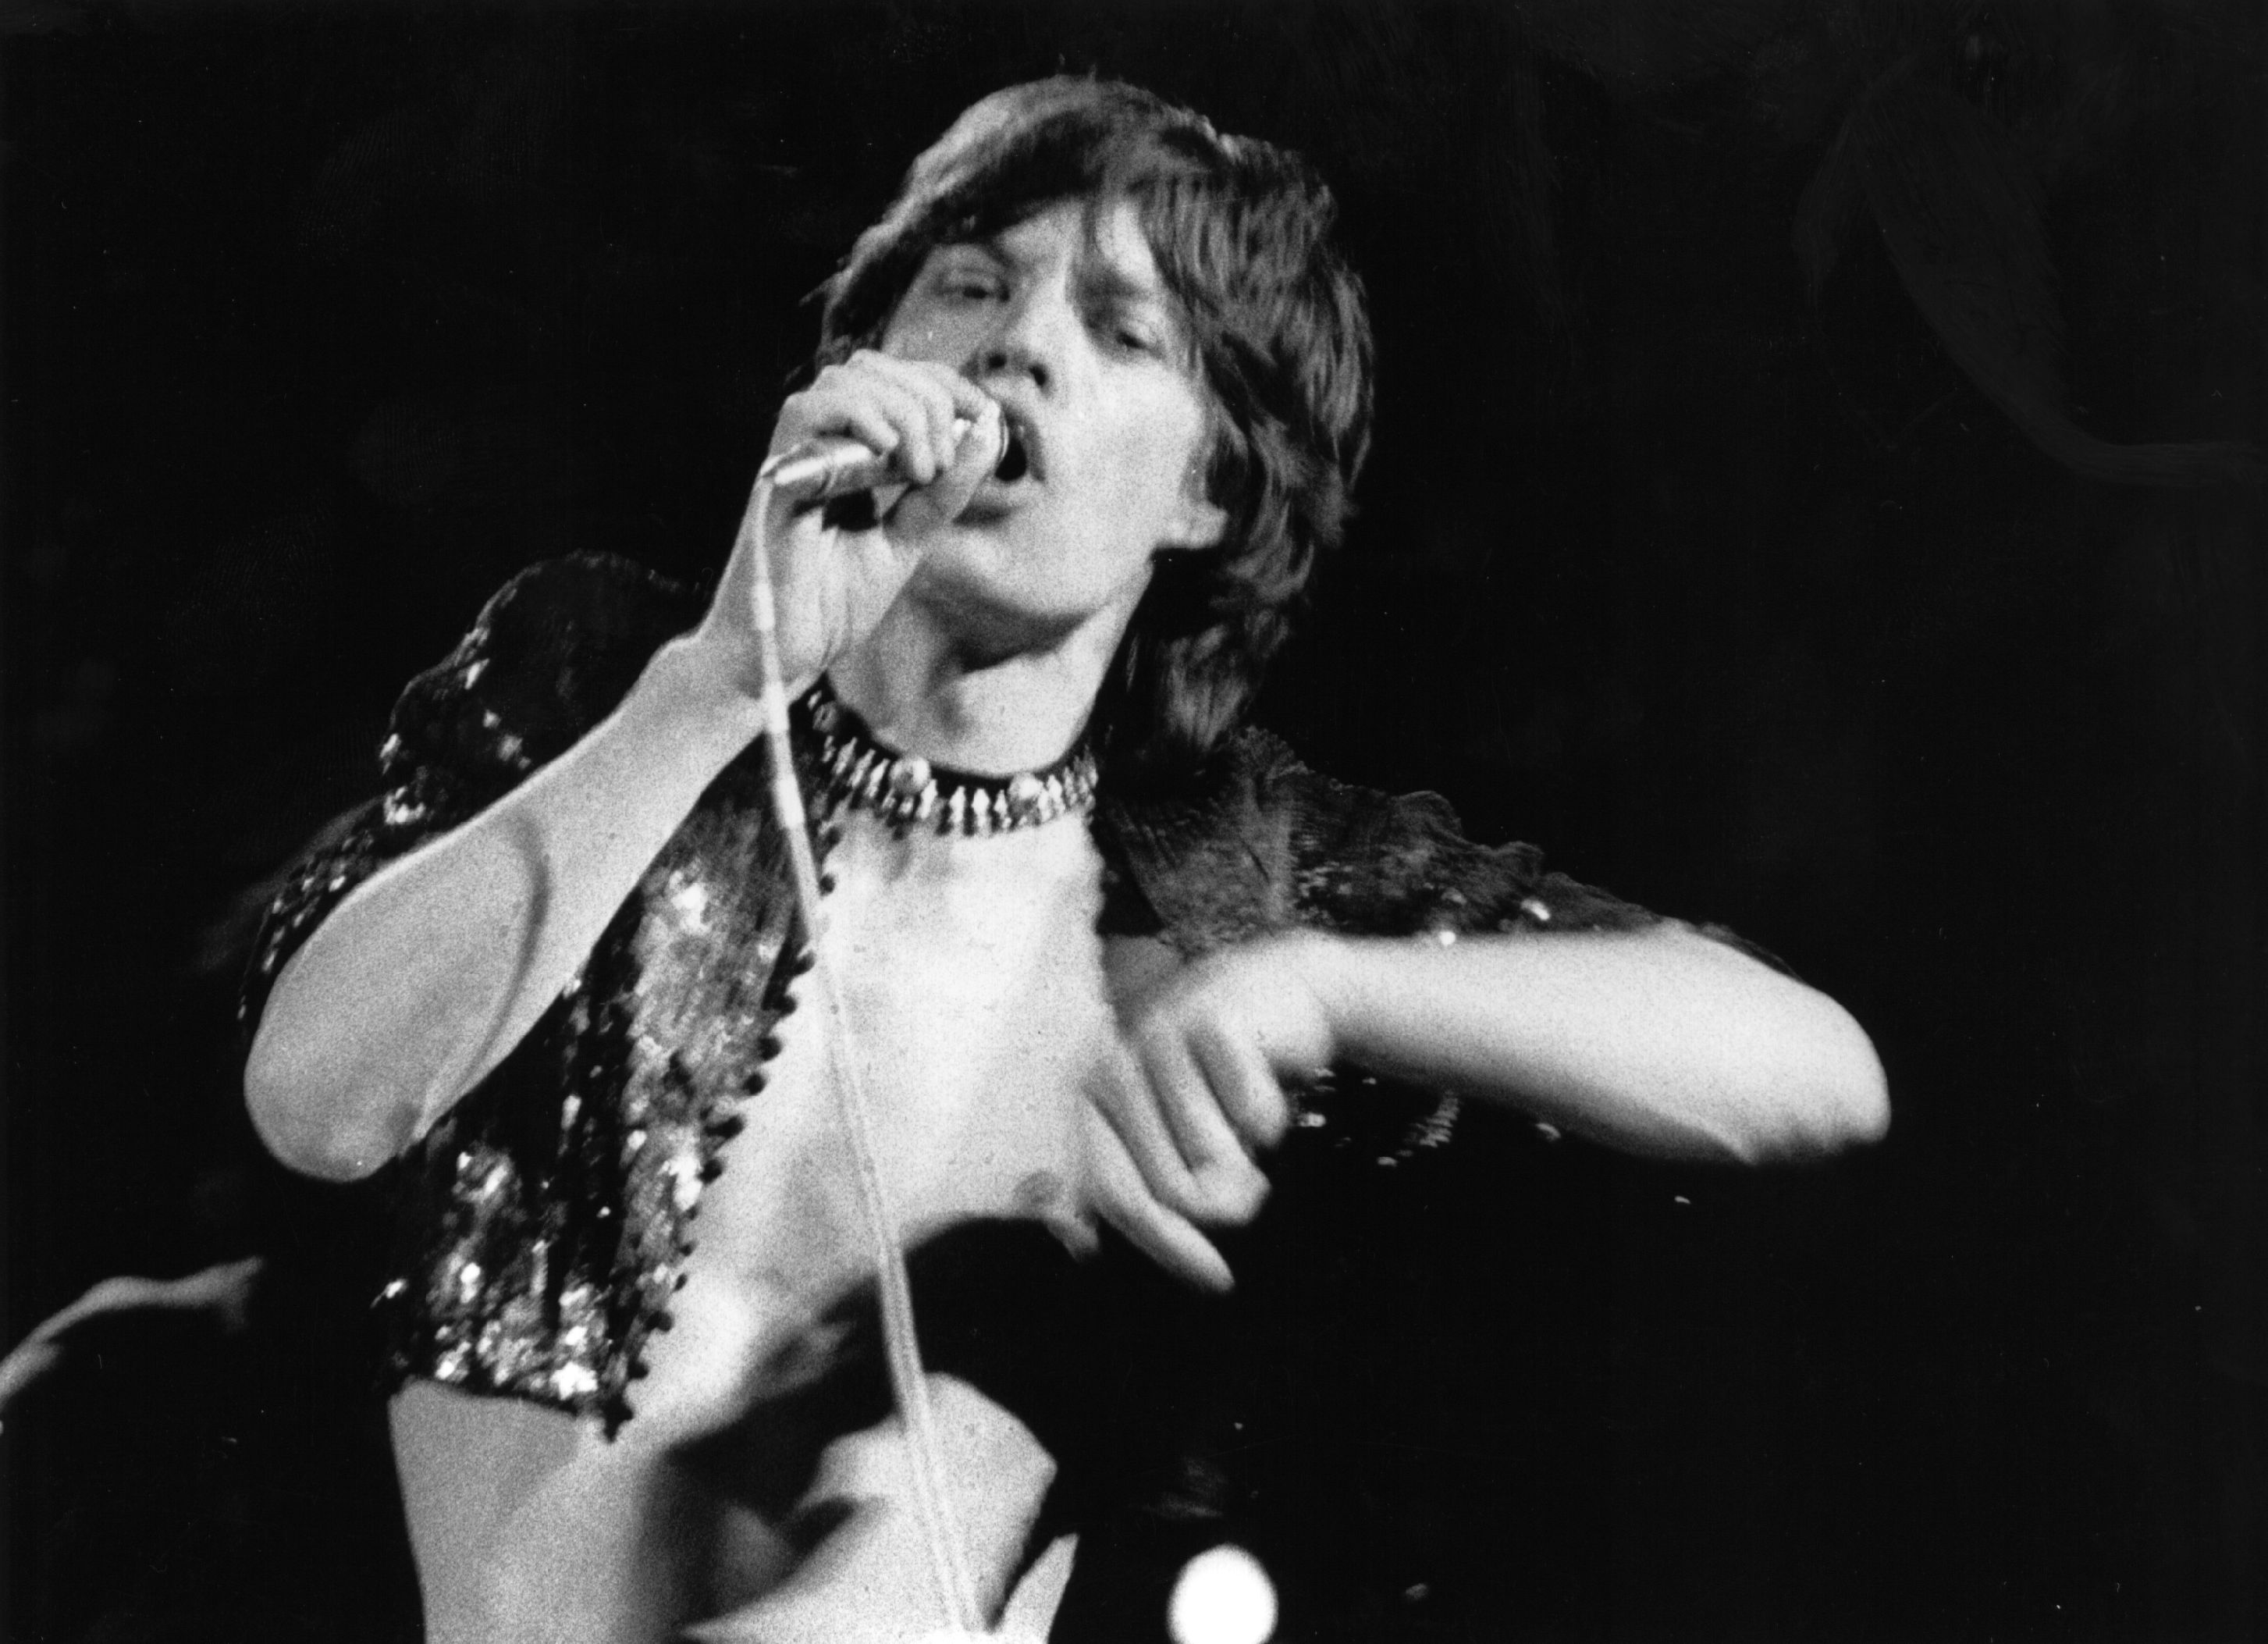 Mick Jagger with a microphone